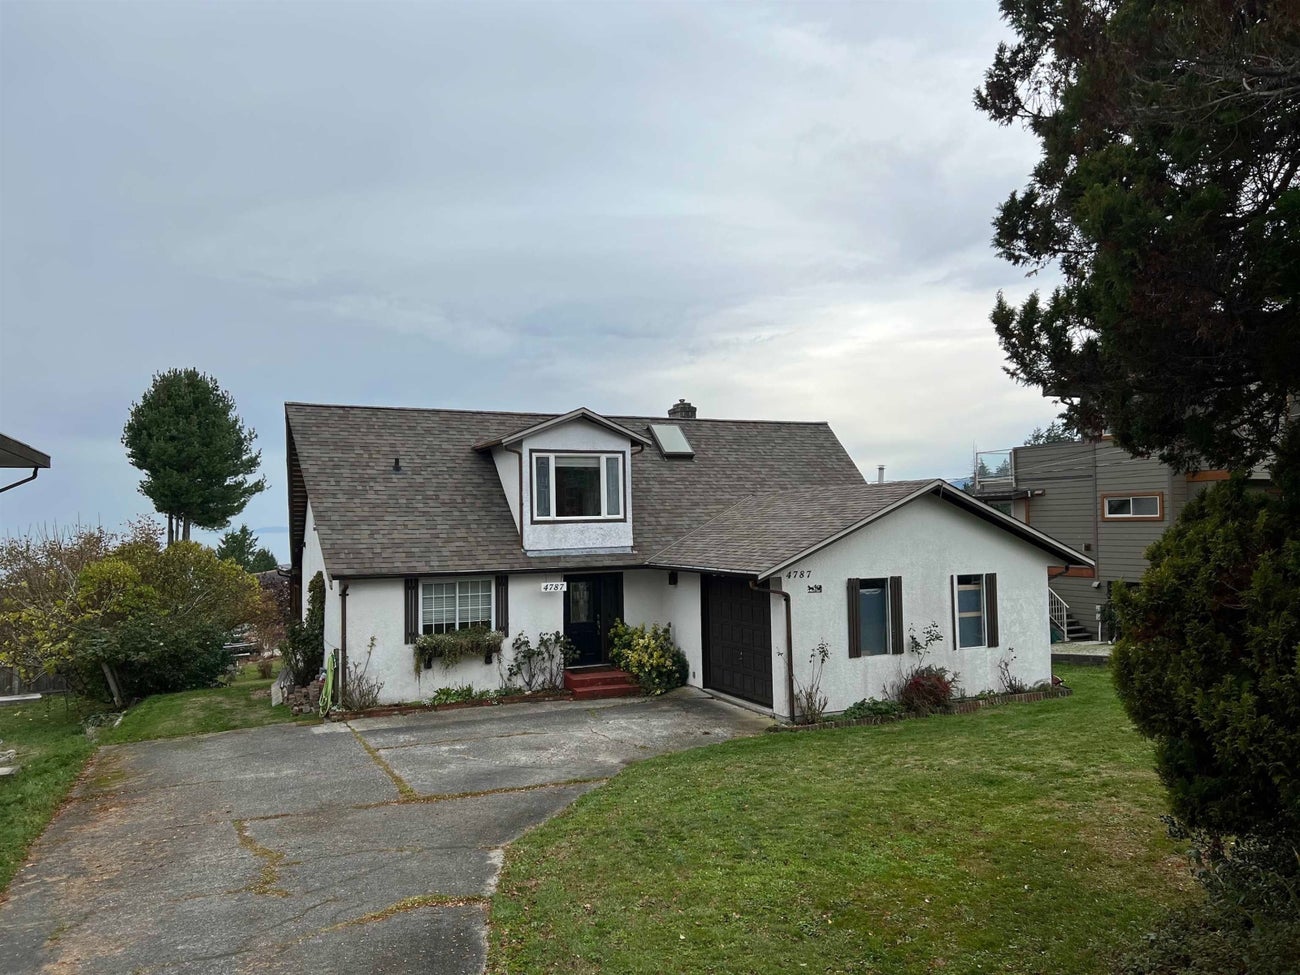 4787 FIR ROAD - Sechelt District House/Single Family for sale, 3 Bedrooms (R2630333) #4